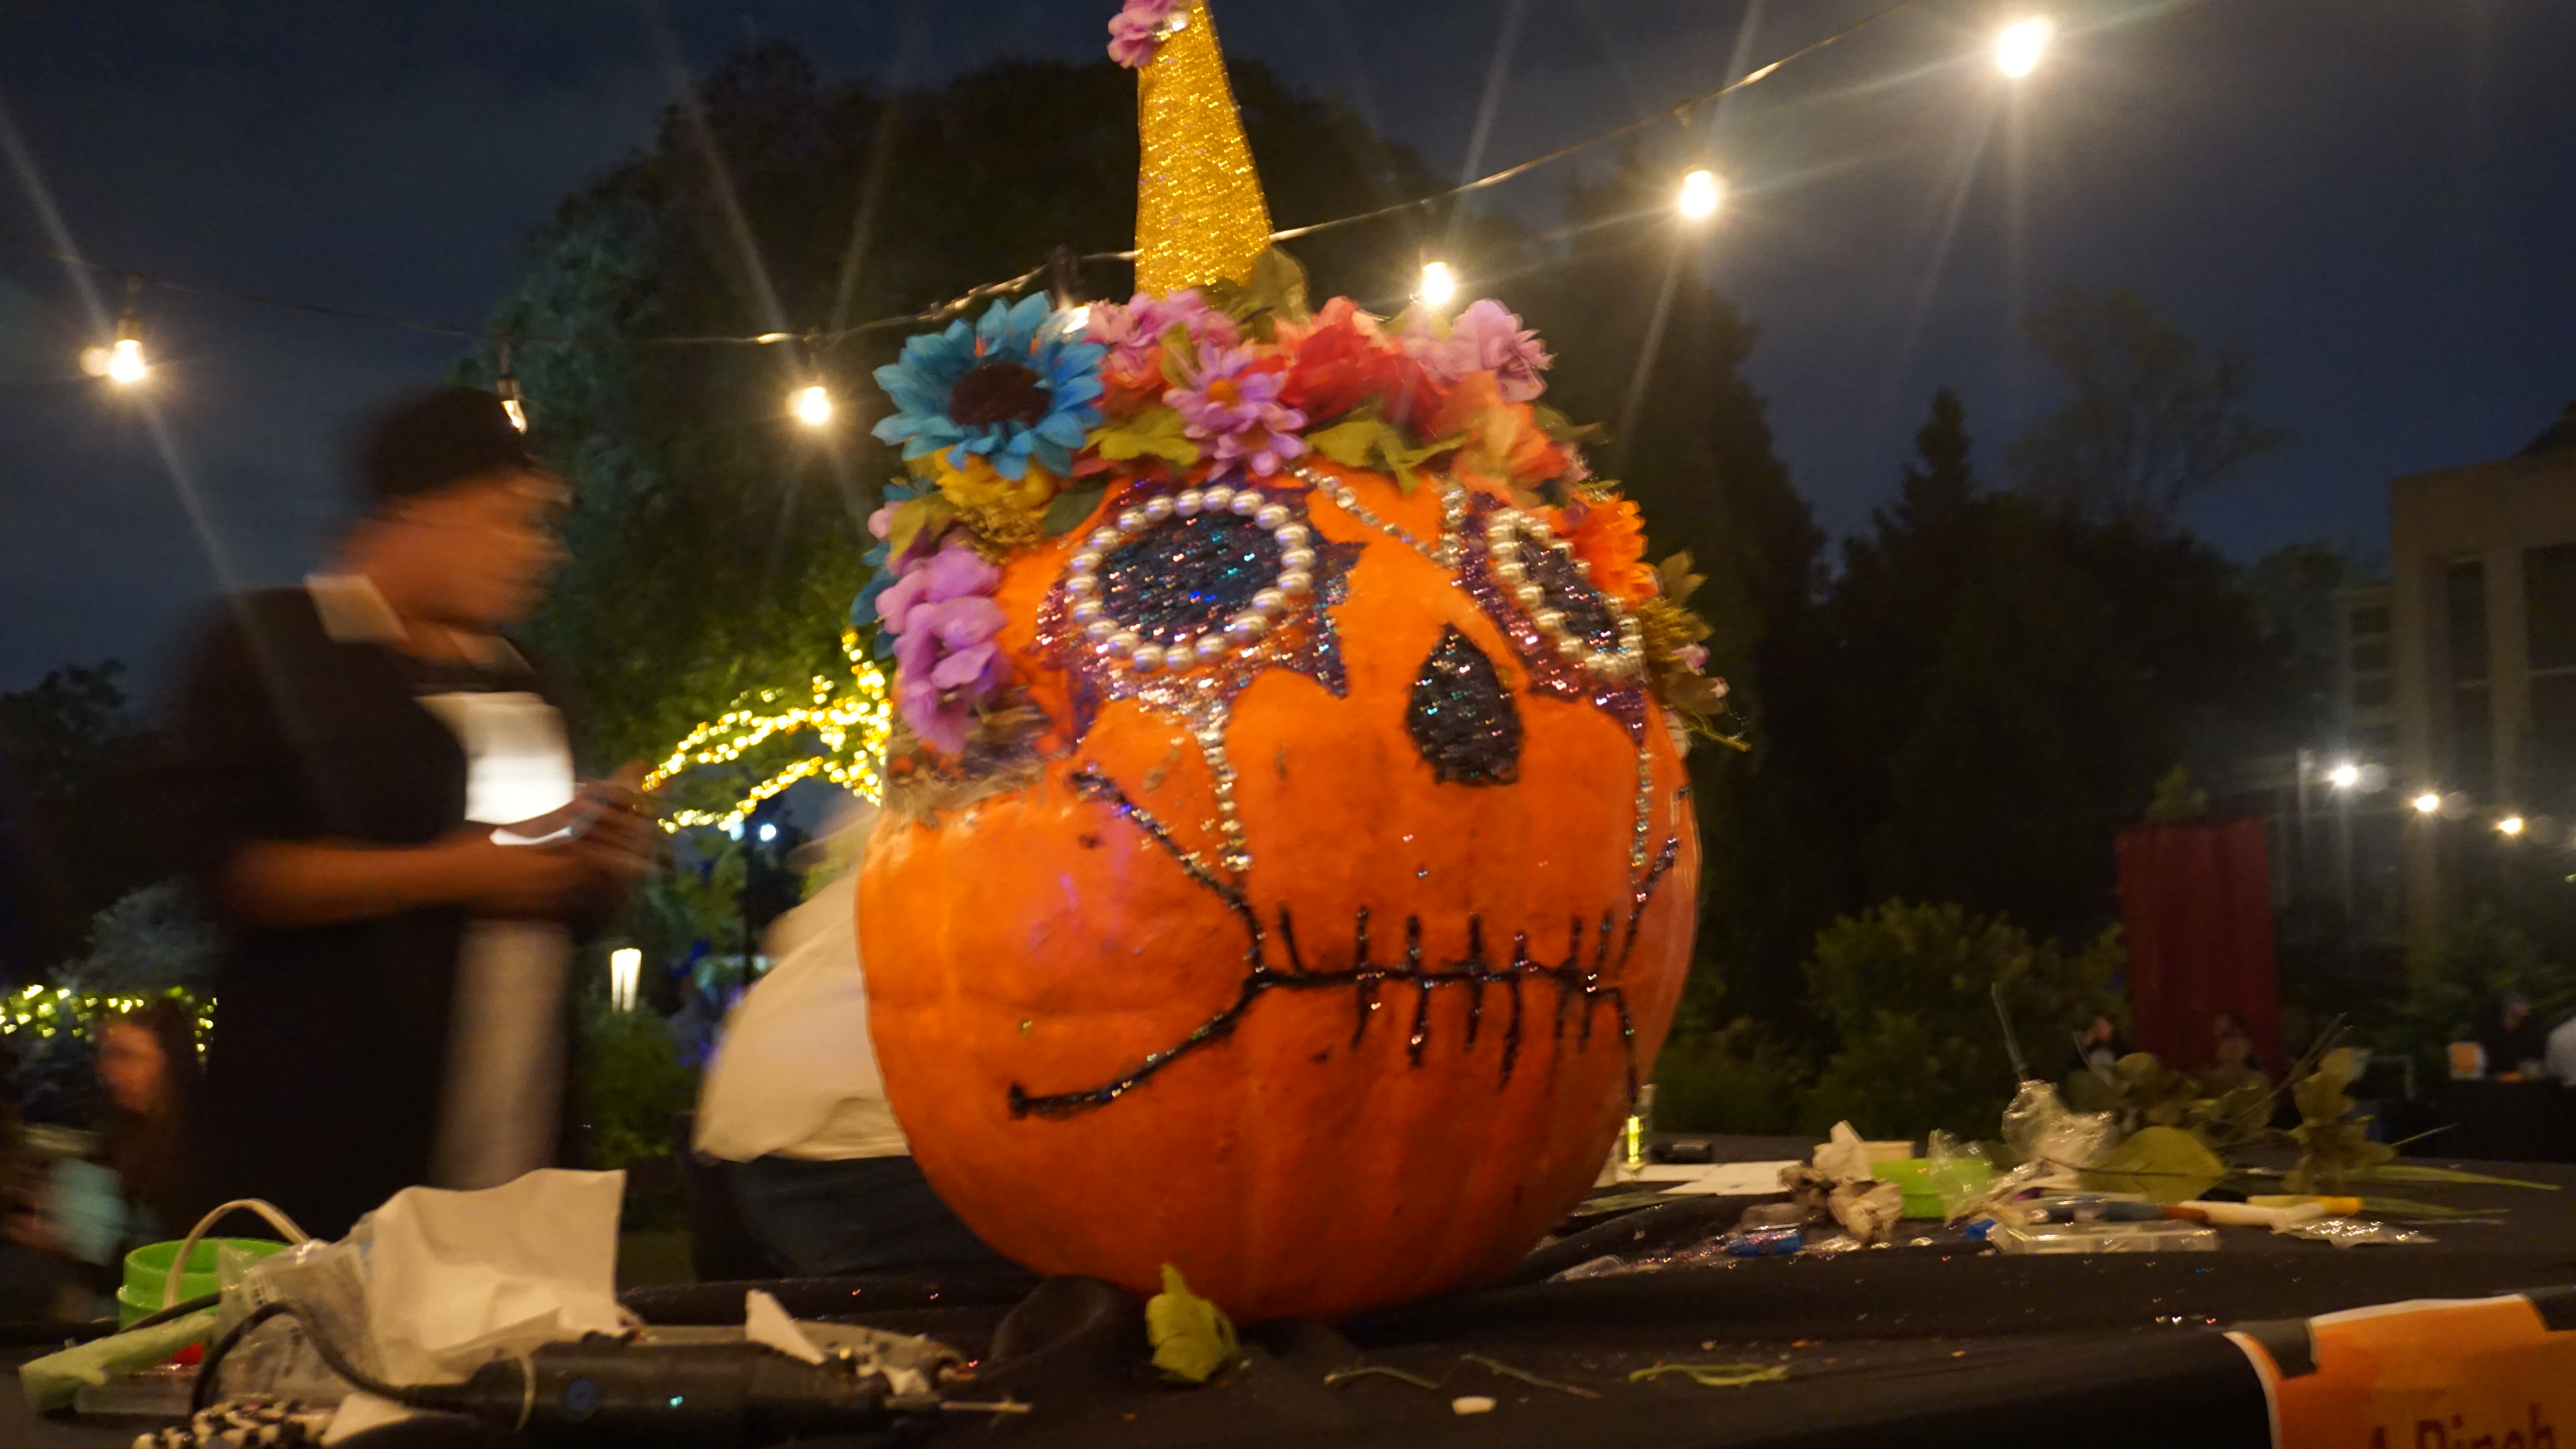 Colorful decorations were added to this pumpkin that placed third in the contest.